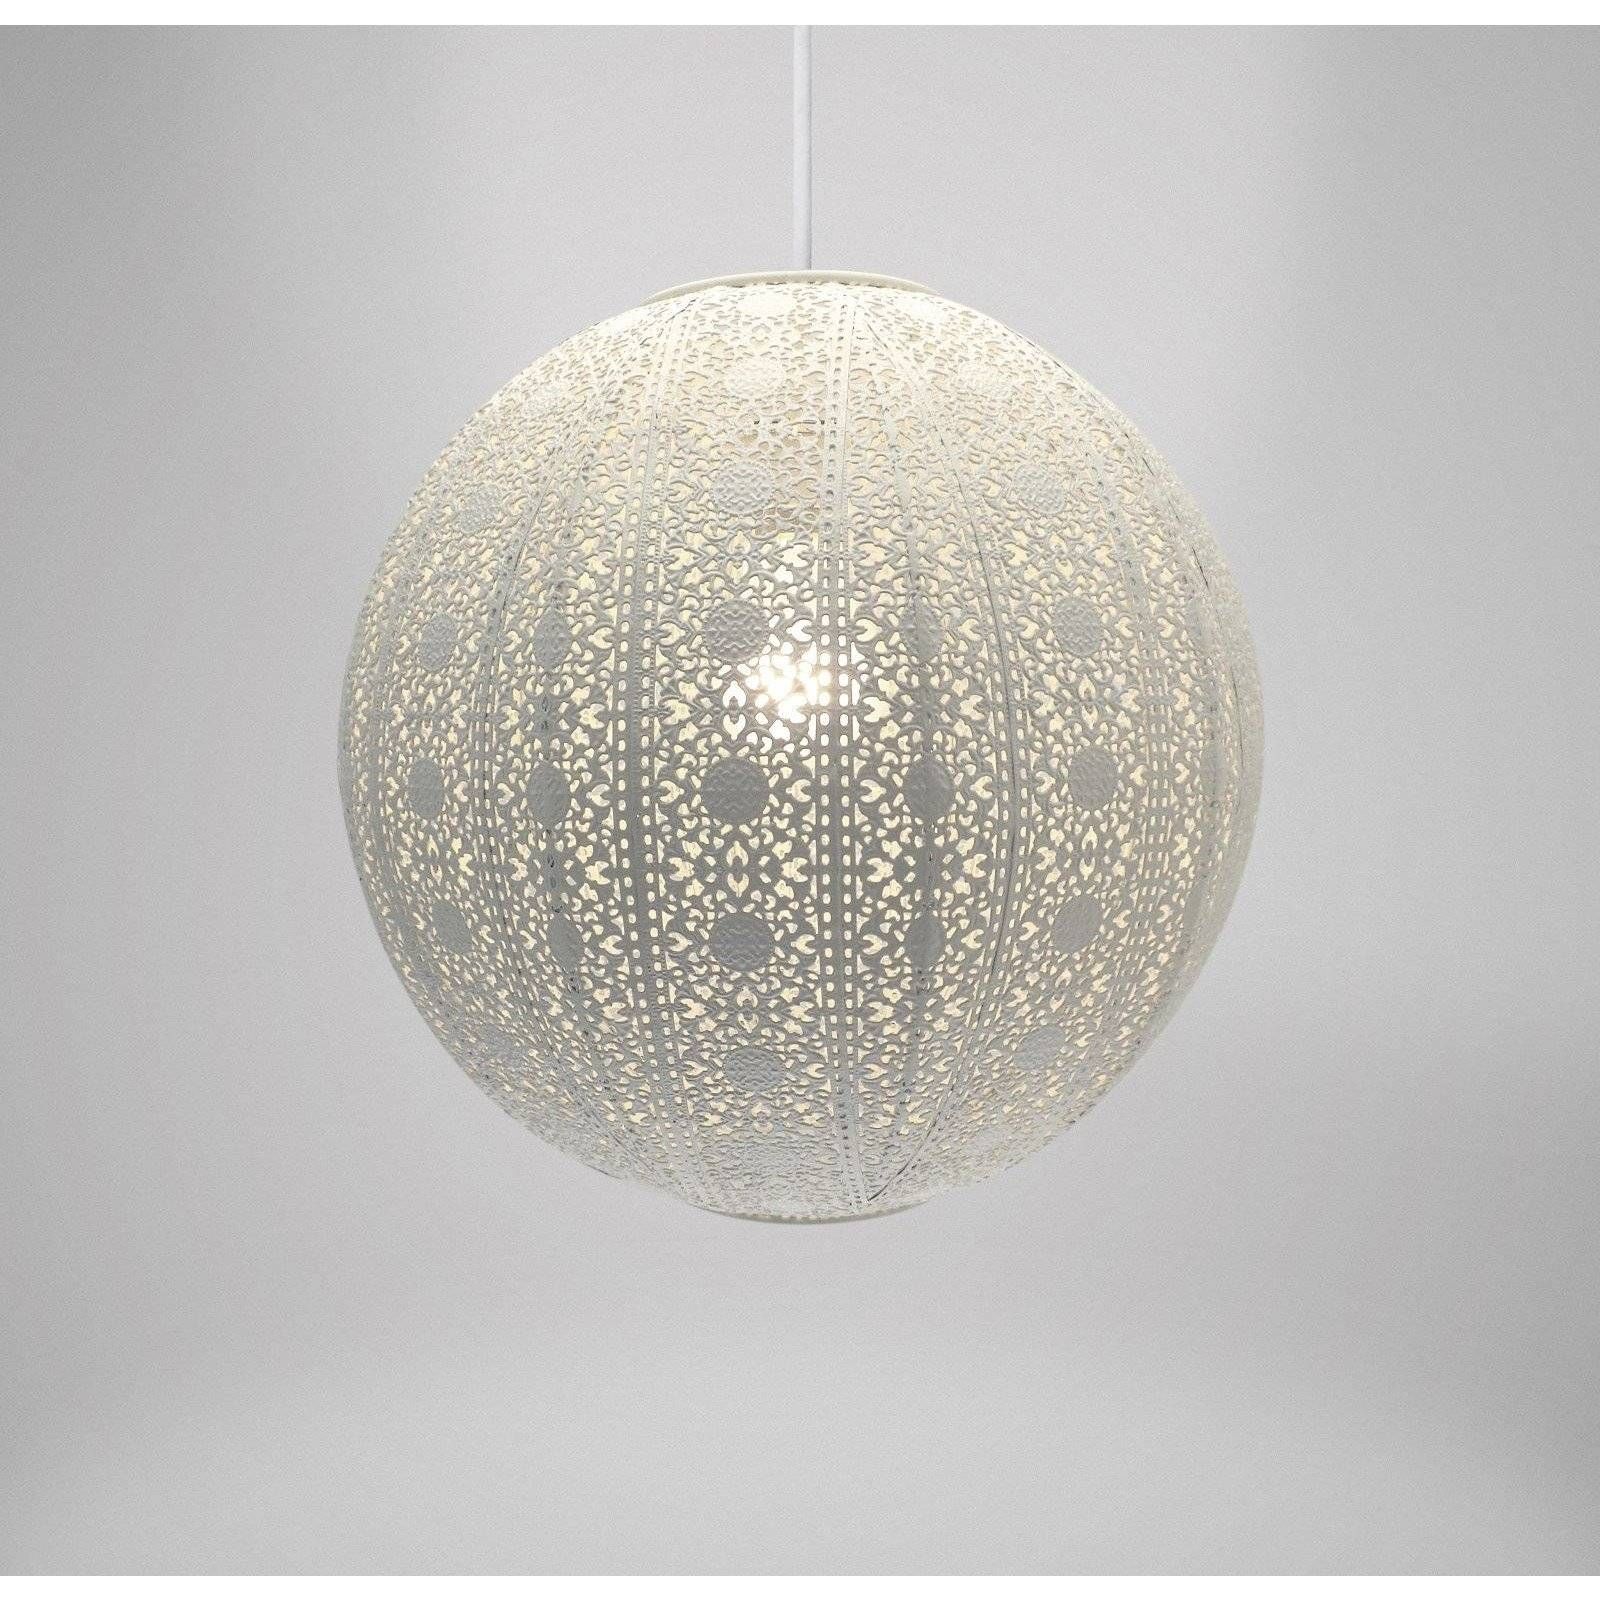 Buy Moroccan Style Pendant Lights – Punched Metal Design At This Throughout Easy Fit Pendant Lights (Photo 9 of 15)